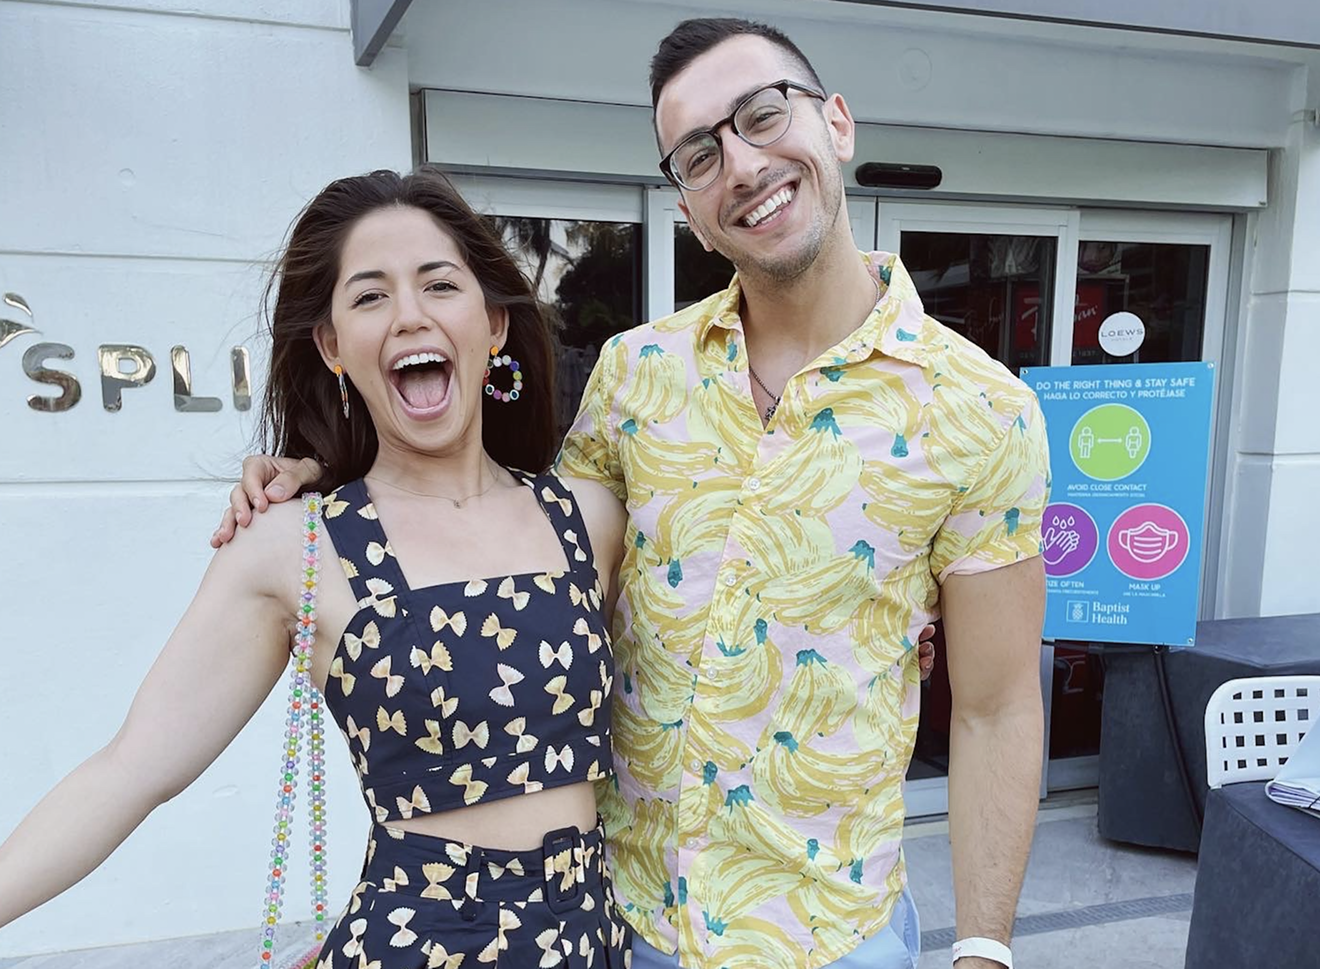 Food Network television star, food blogger, best-selling cookbook author, and restaurant owner Molly Yeh poses with fellow best-selling cookbook author and social media star Jake Cohen at an event at the South Beach Wine & Food Festival.